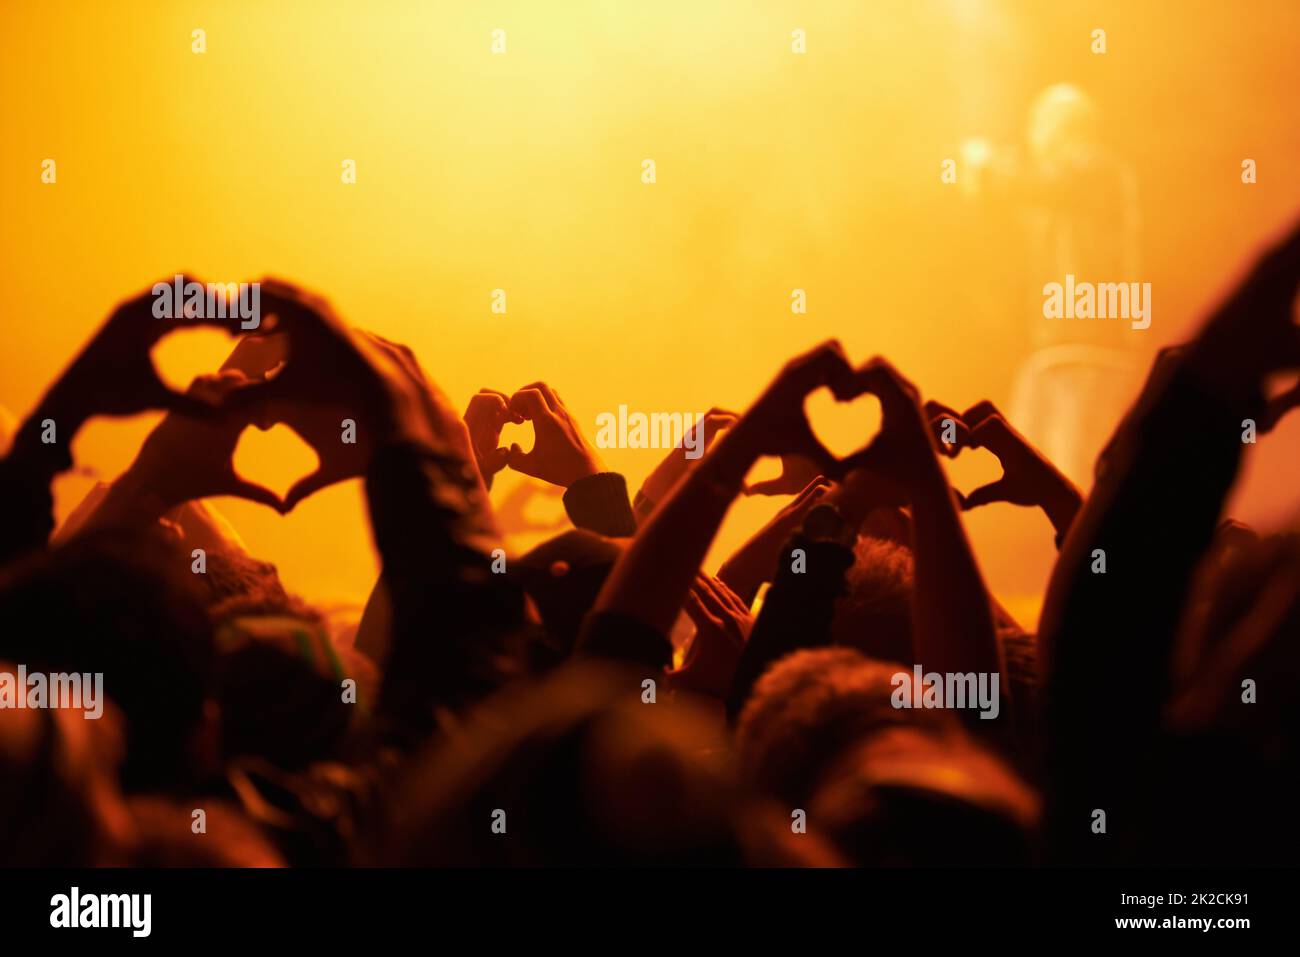 Love and light. Rear view of an audience making heart-shapes with their hands. Stock Photo